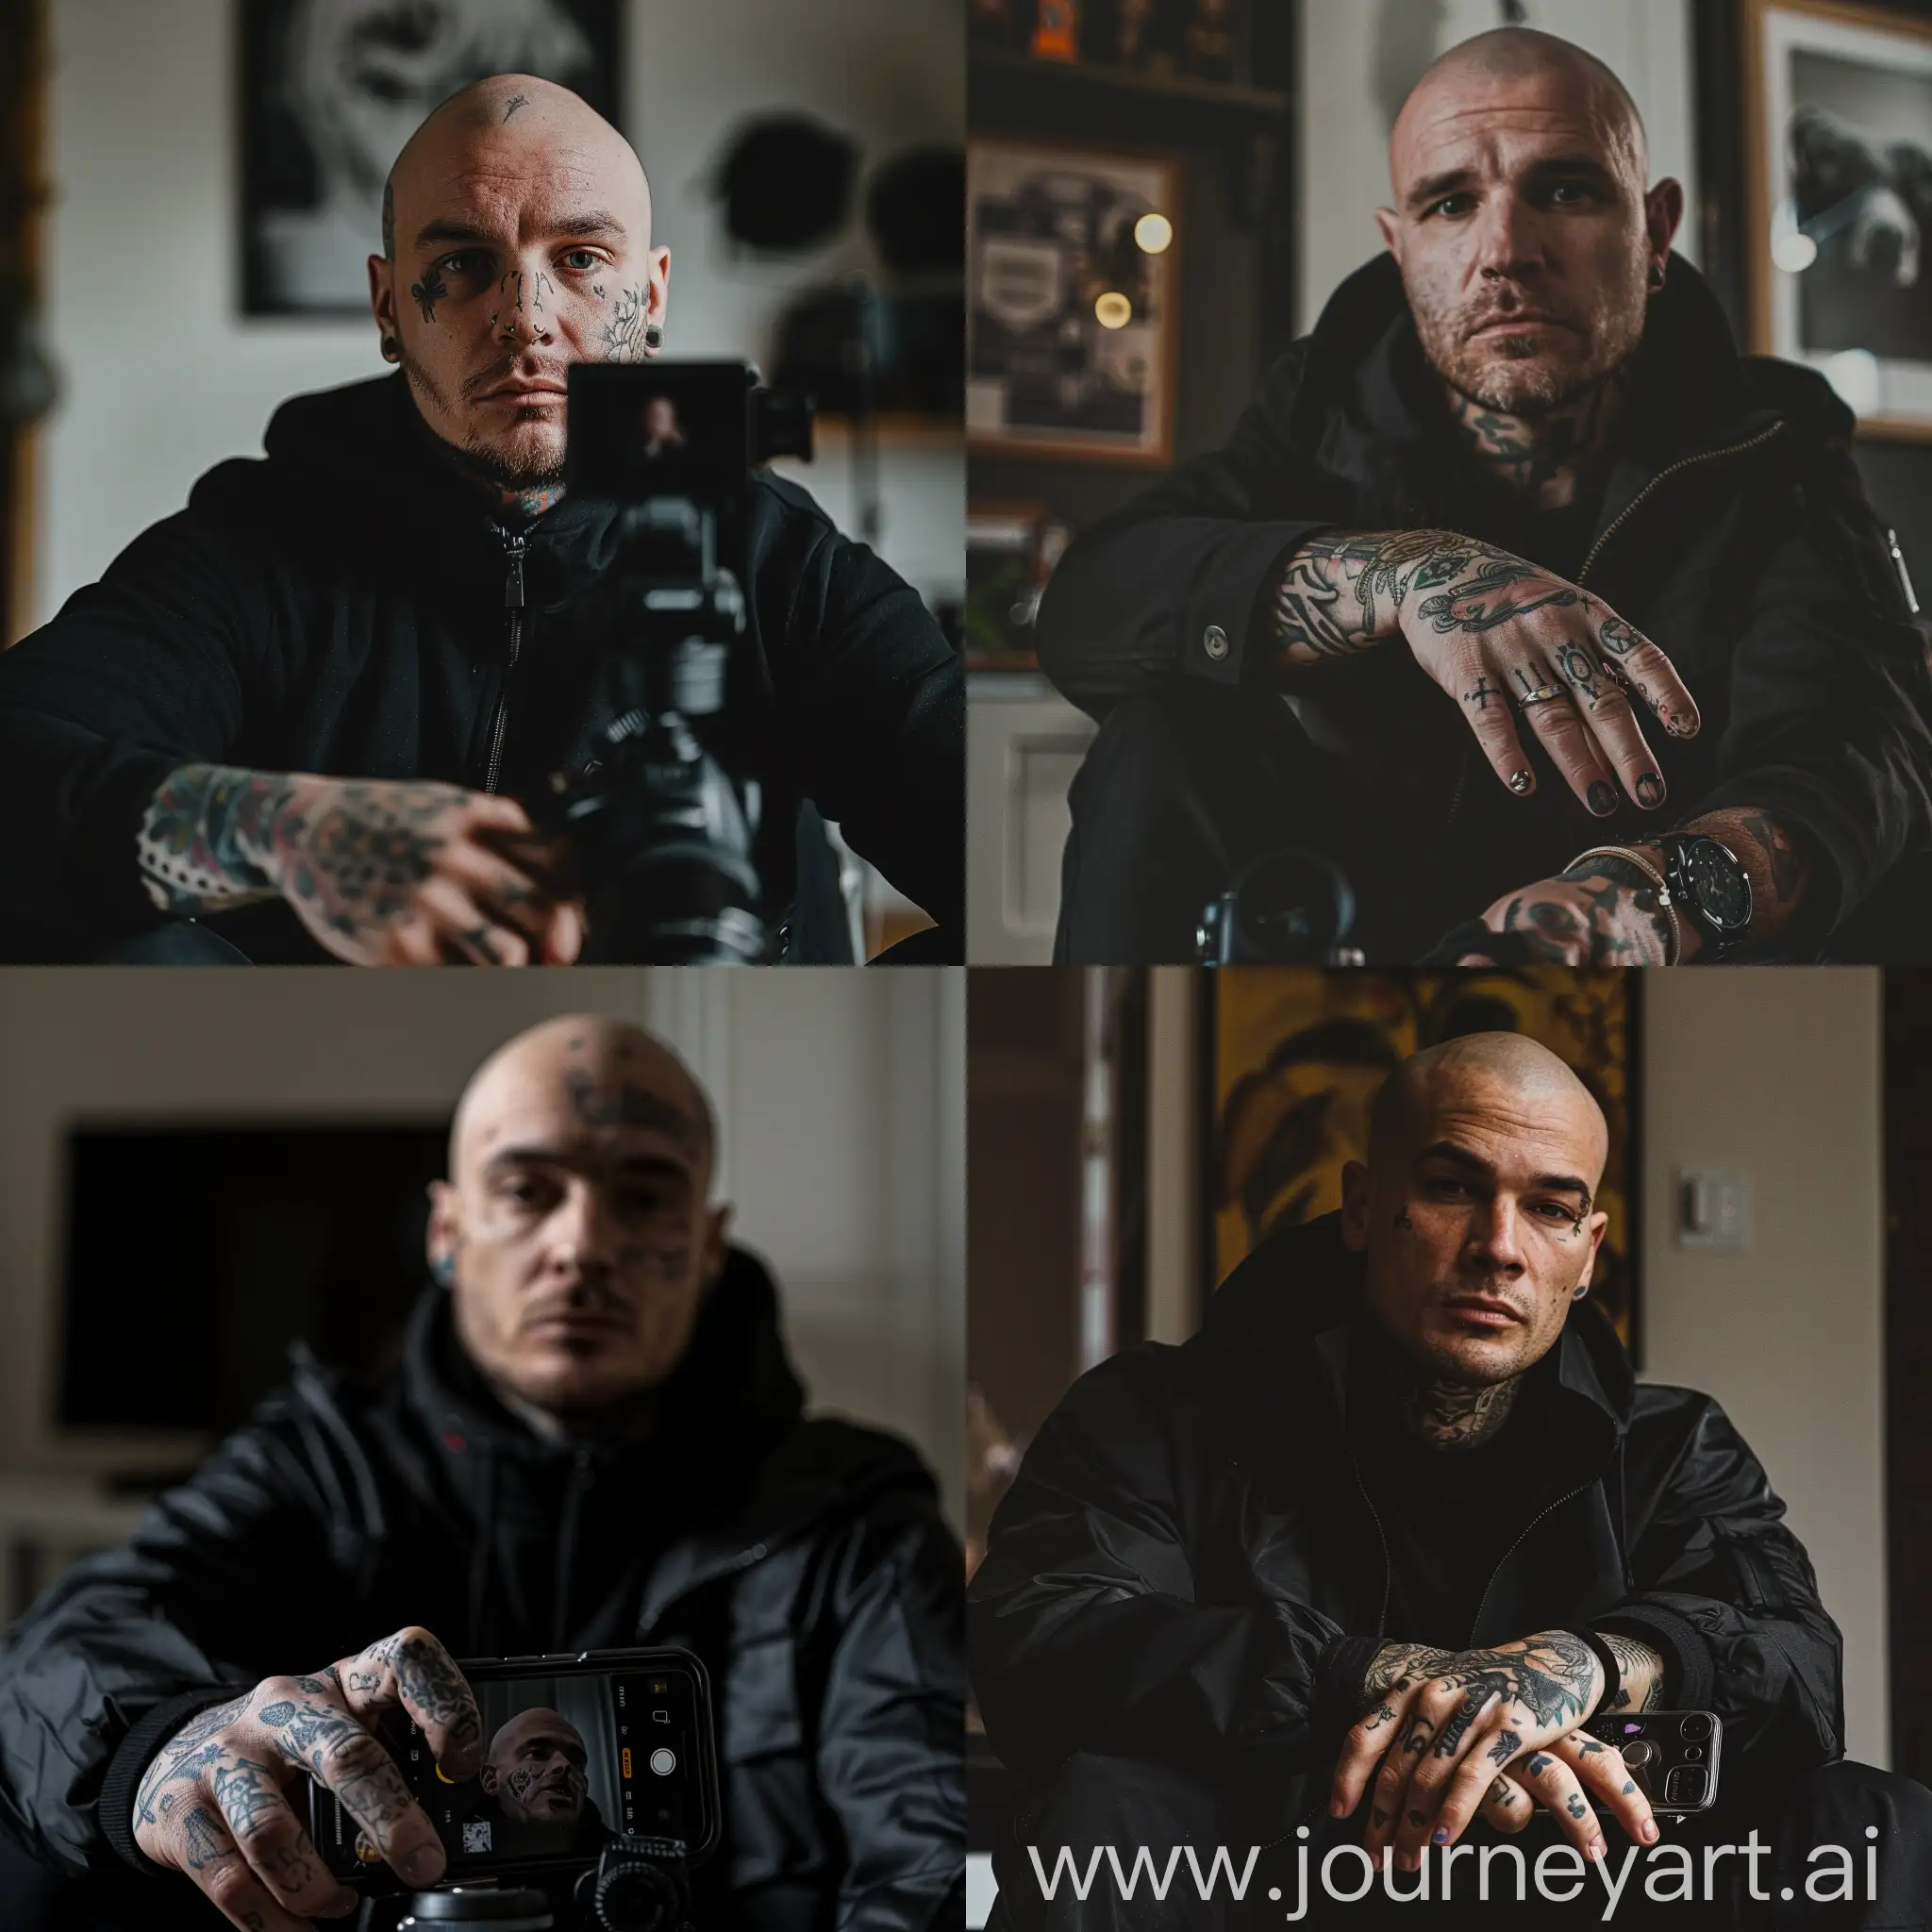 Bald-Man-with-Hand-Tattoos-in-Black-Jacket-Portrait